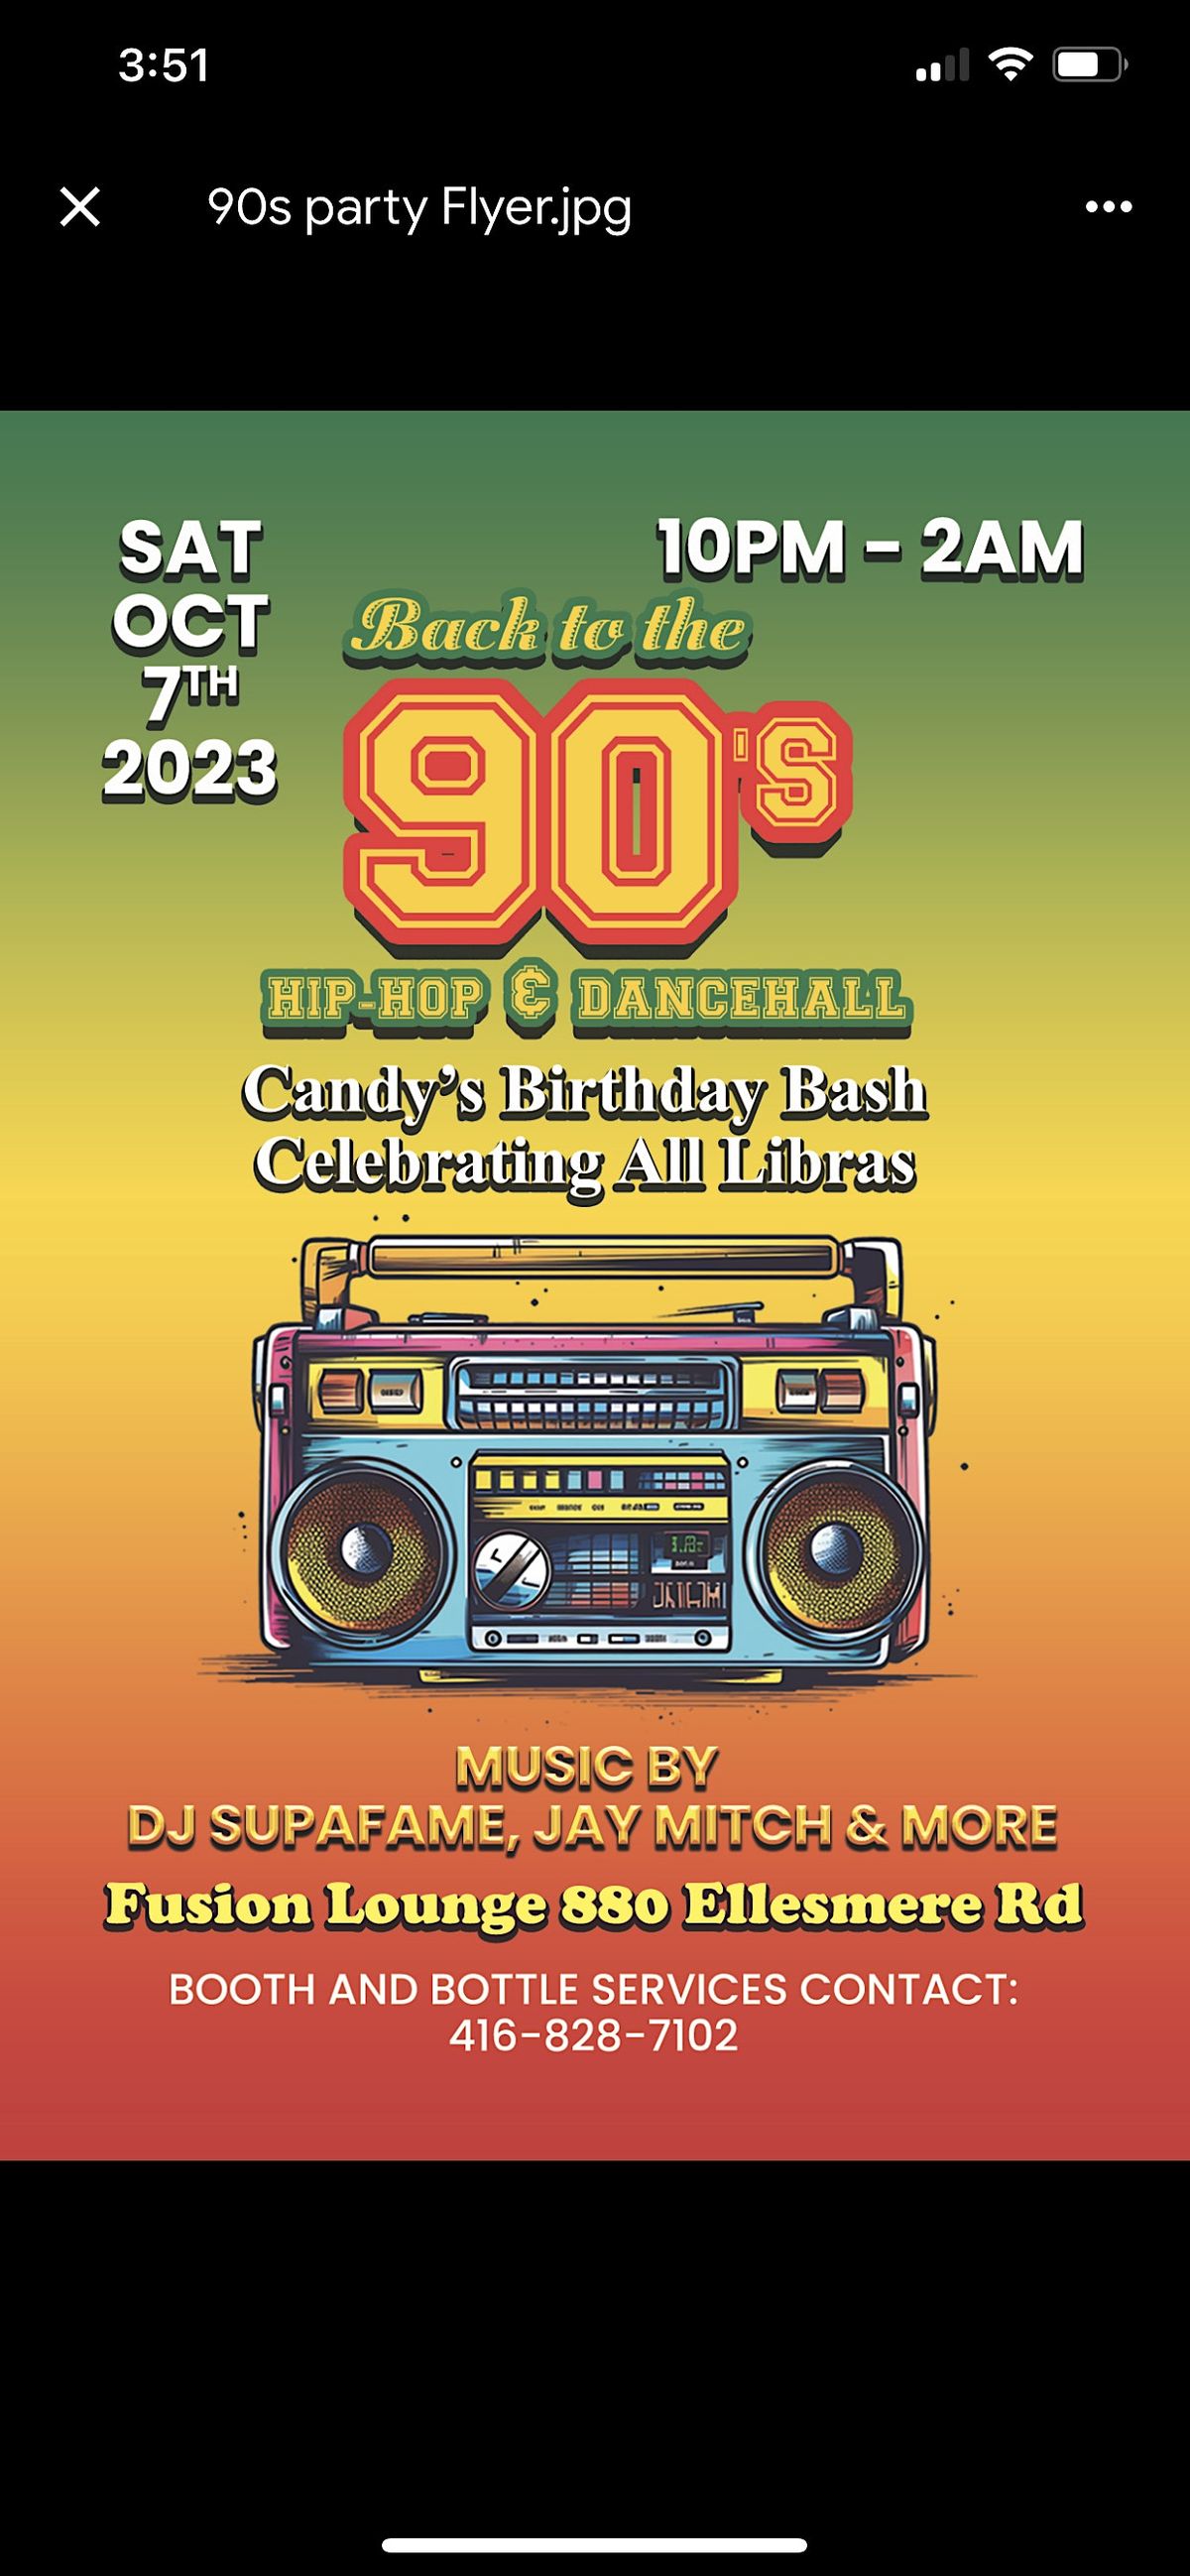 Back To The 90s Hip Hop and Dancehall